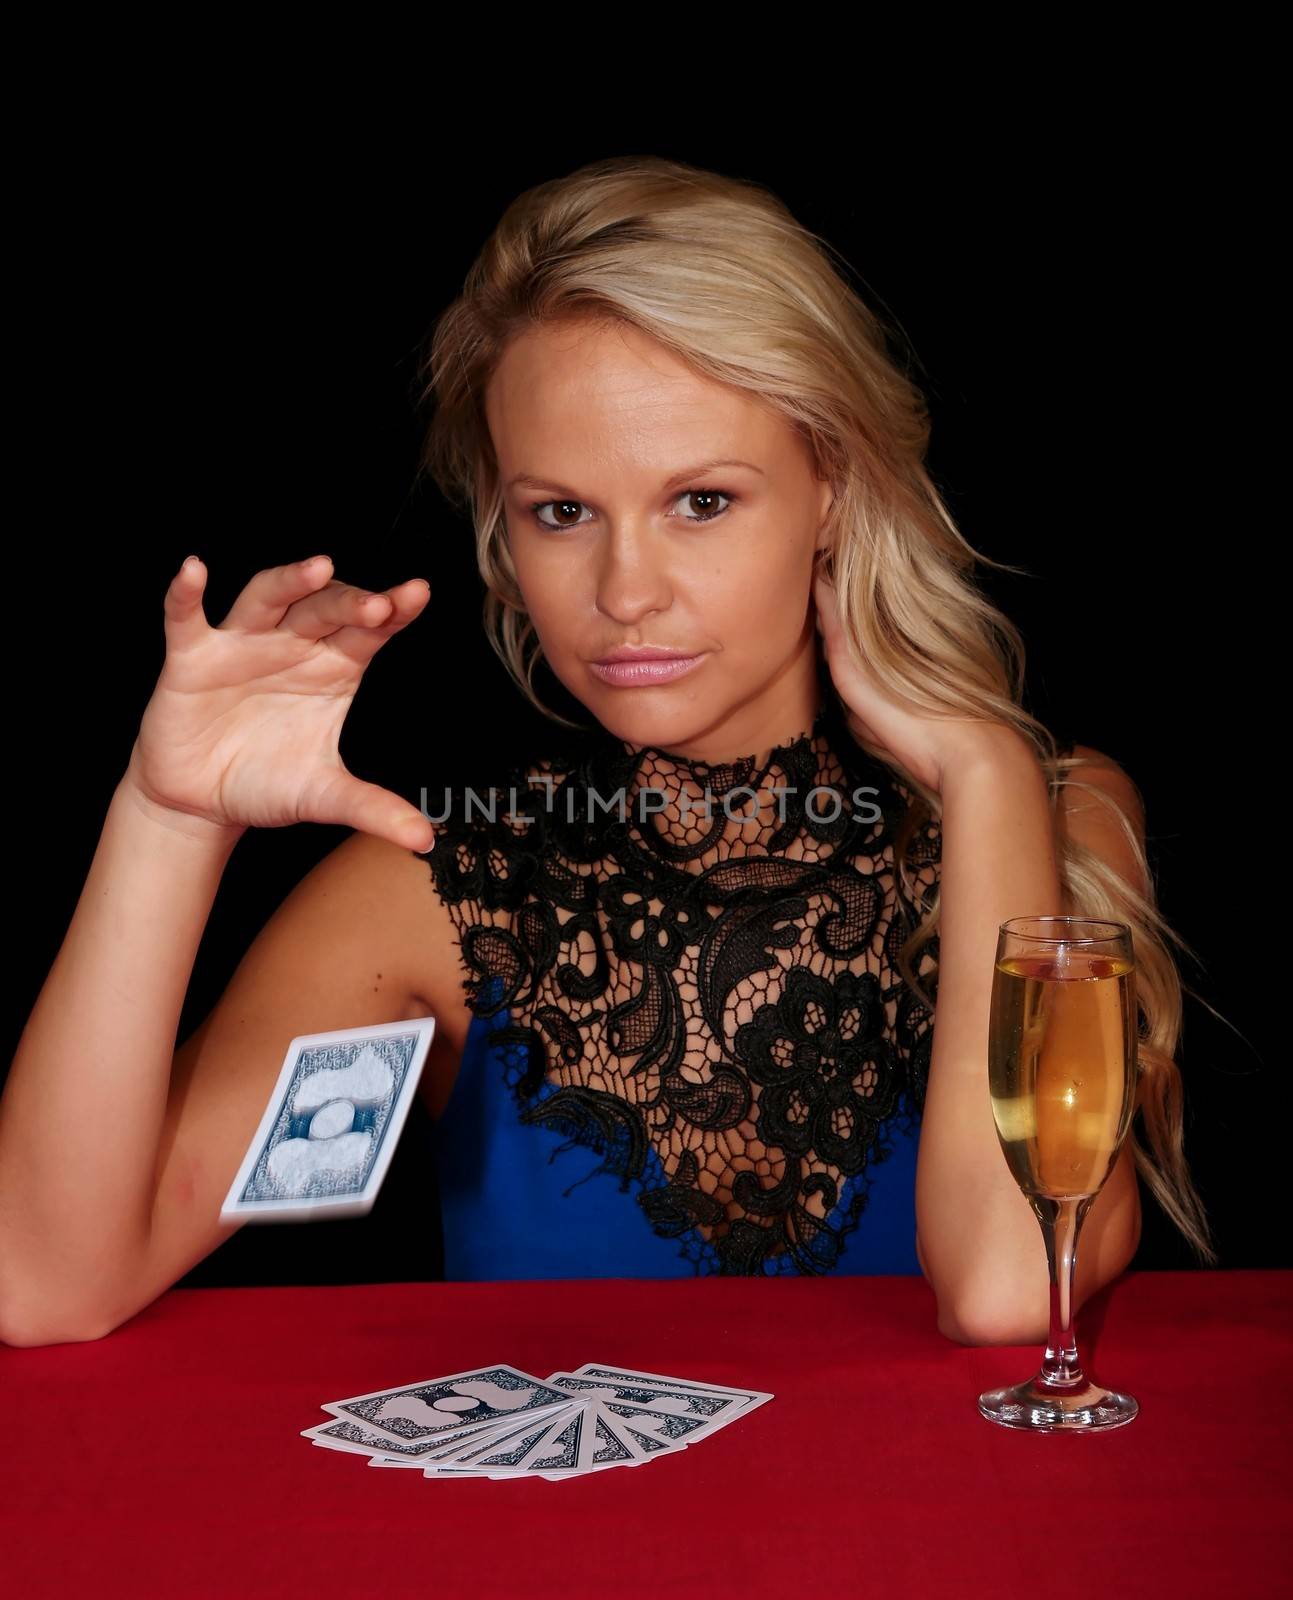 Lovely lady poker player dropping a card onto the table